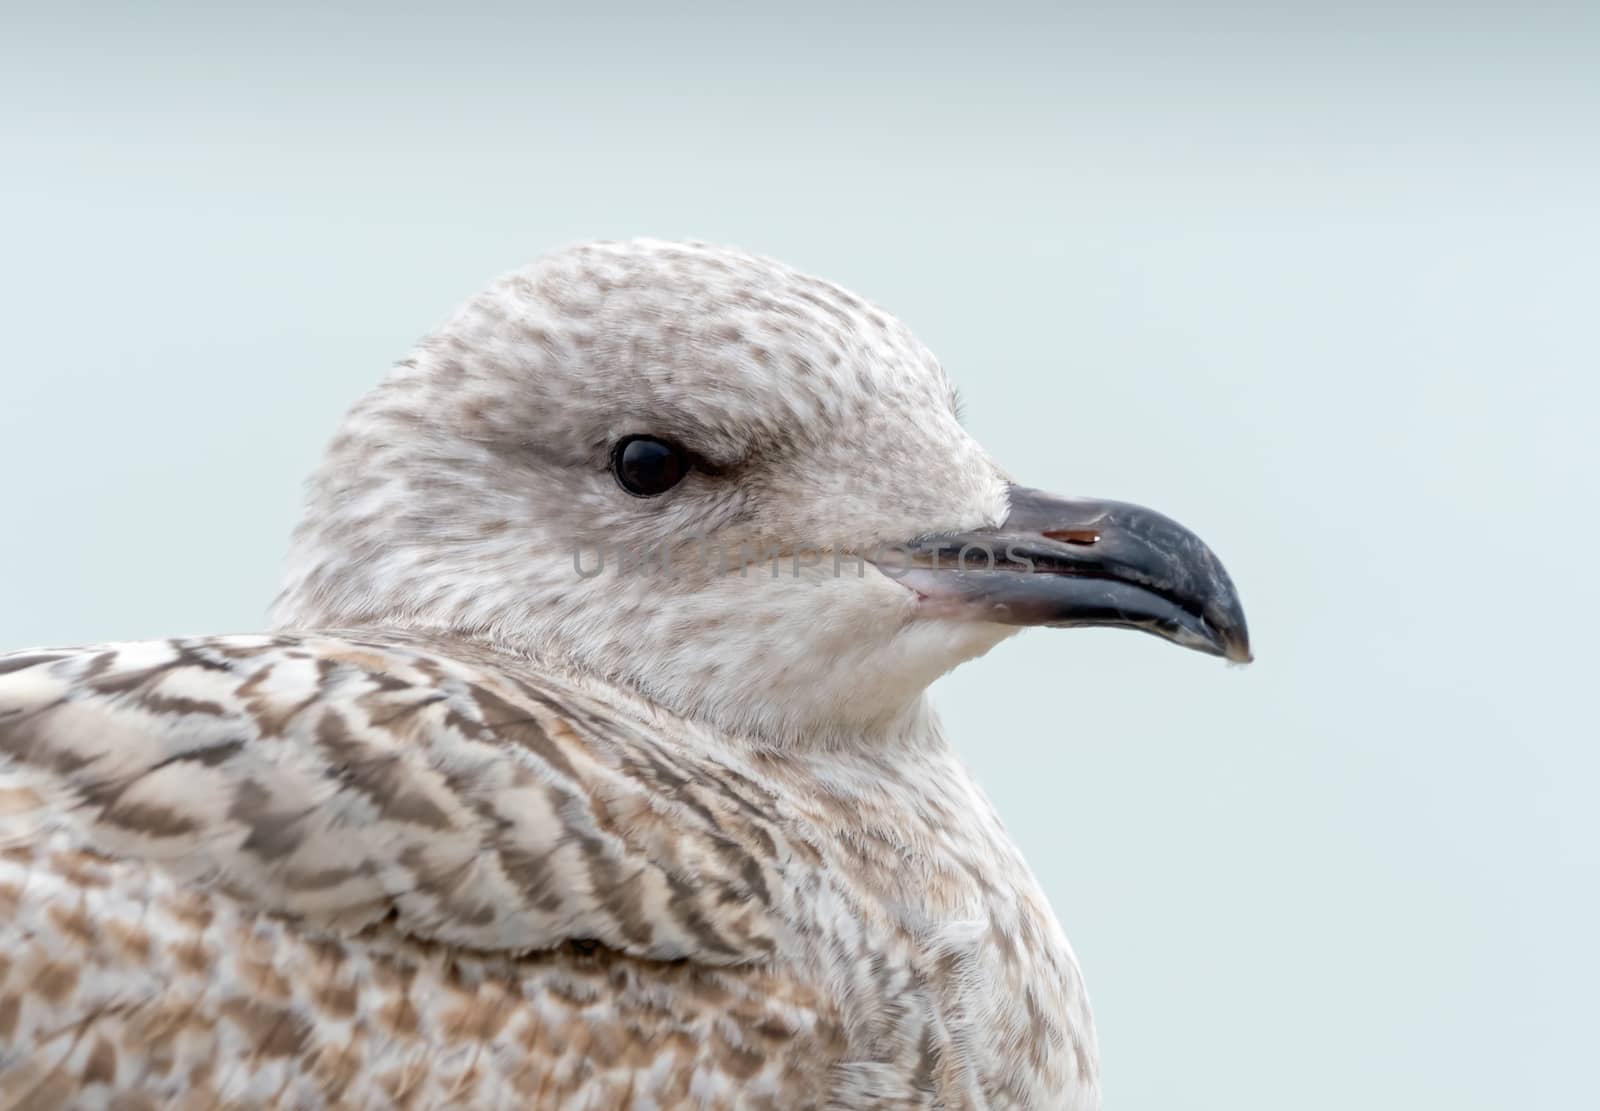 Juvenile Herring Gull head shot with speckled plumage.